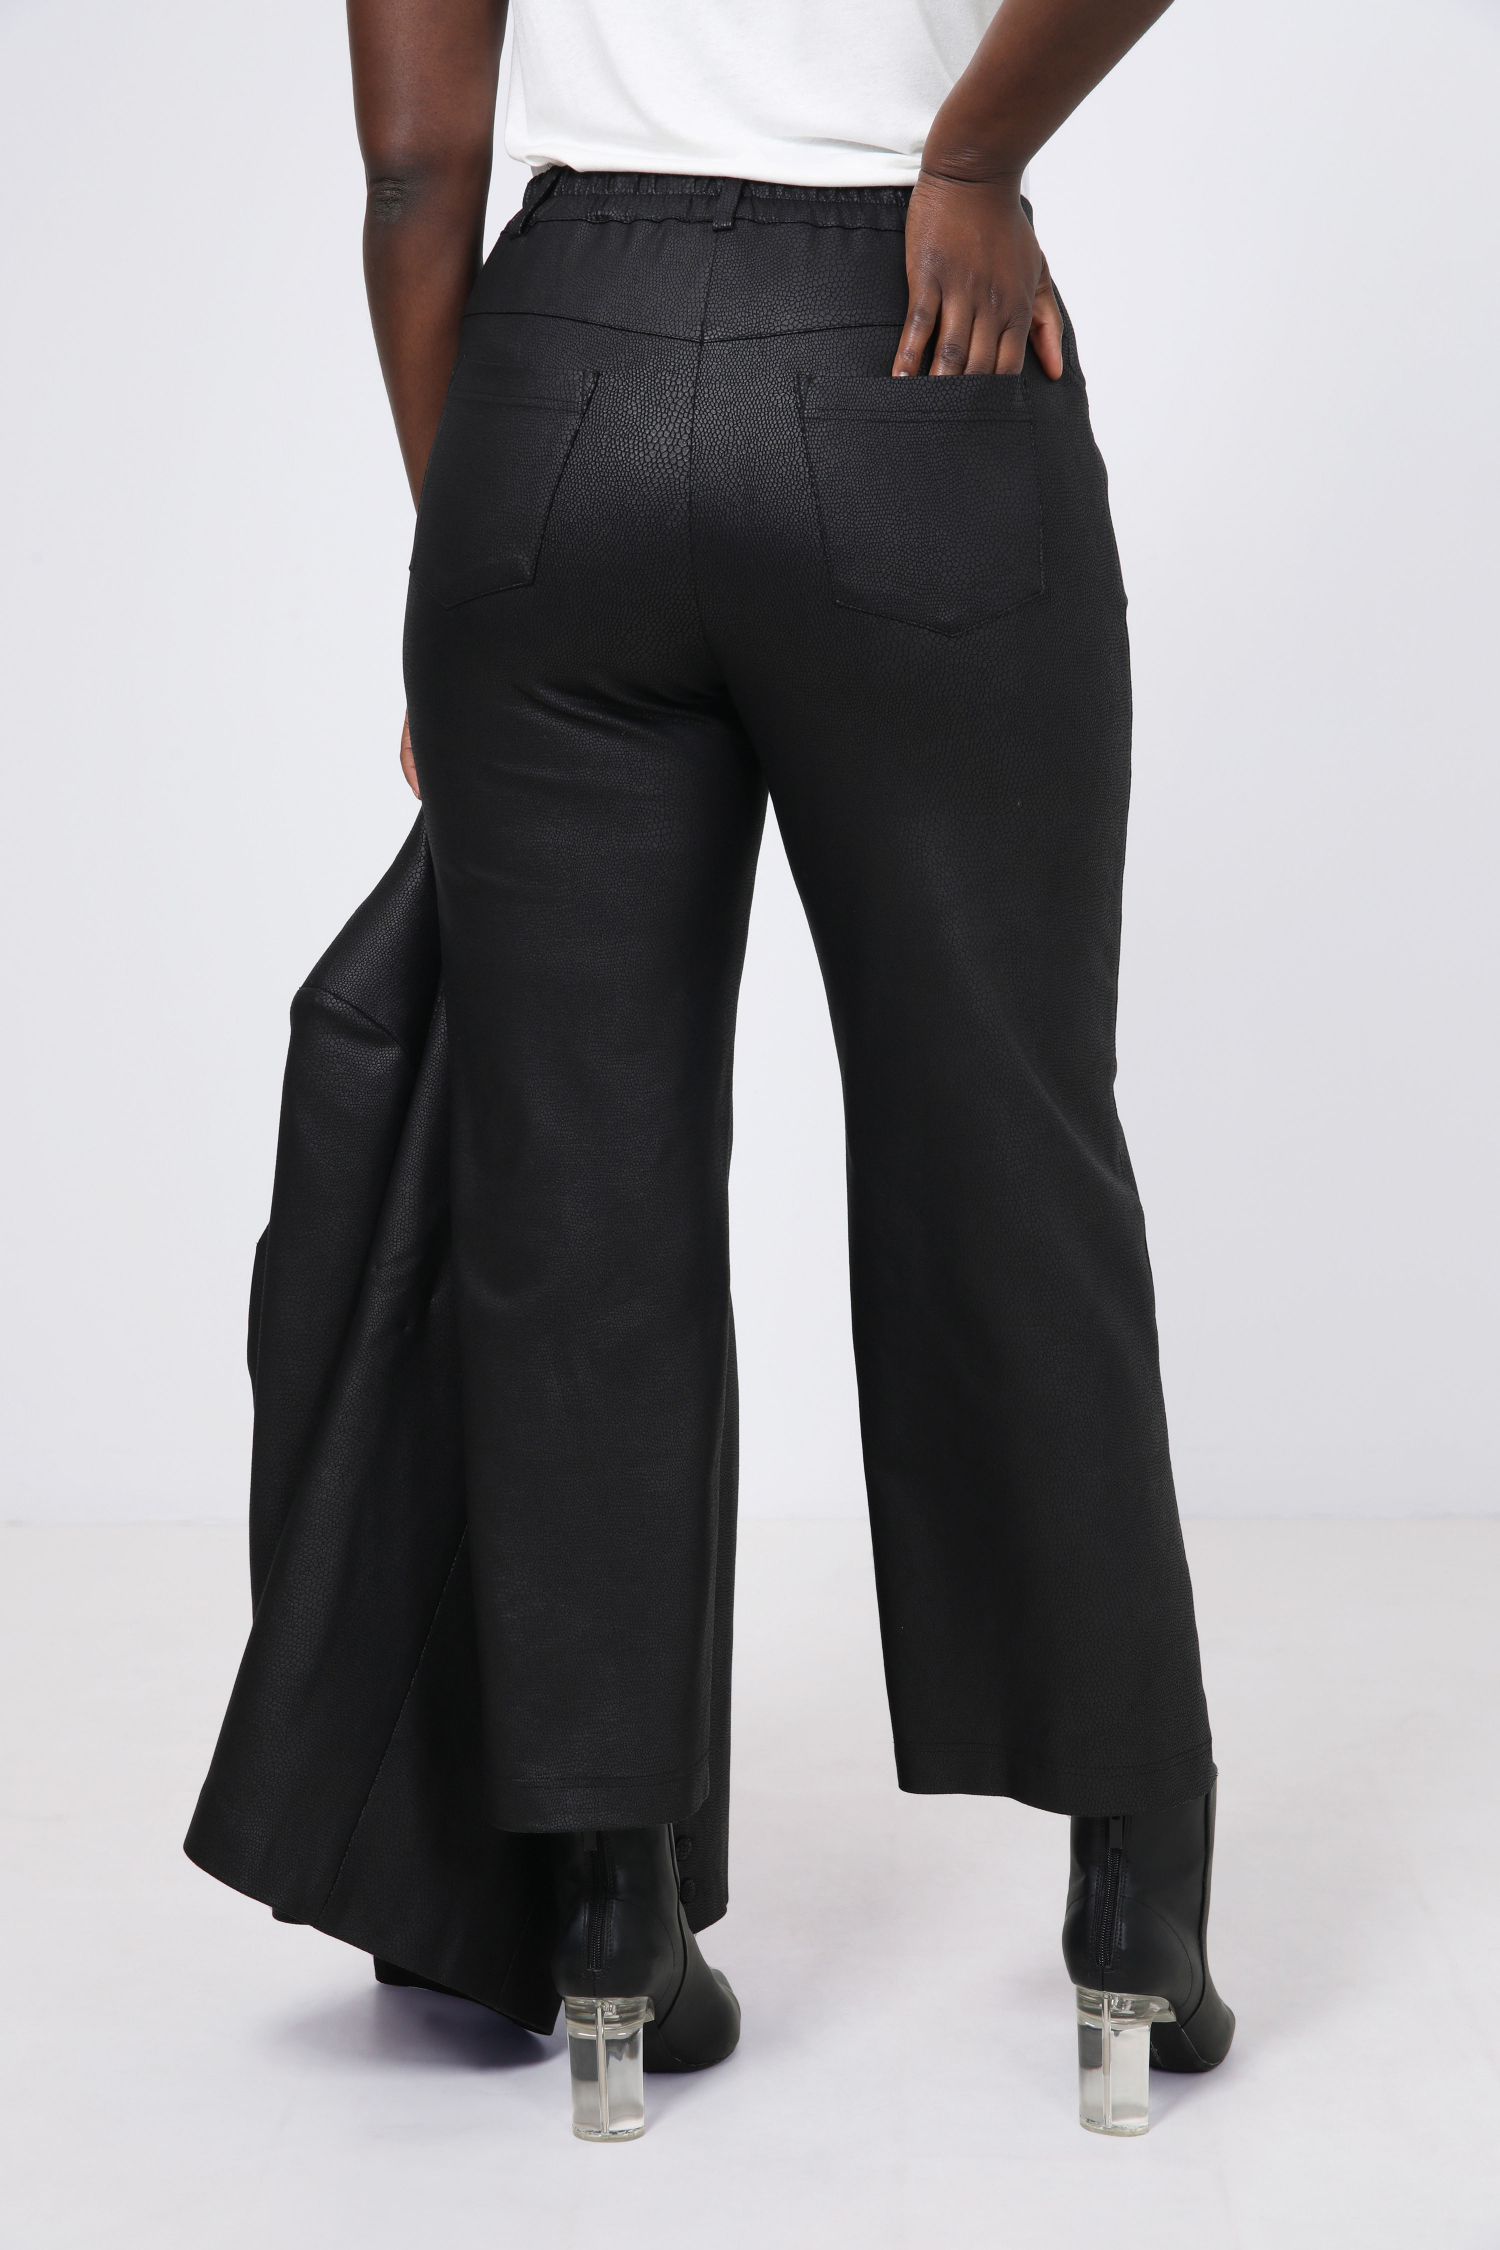 5-pocket trousers in cracked effect faux leather